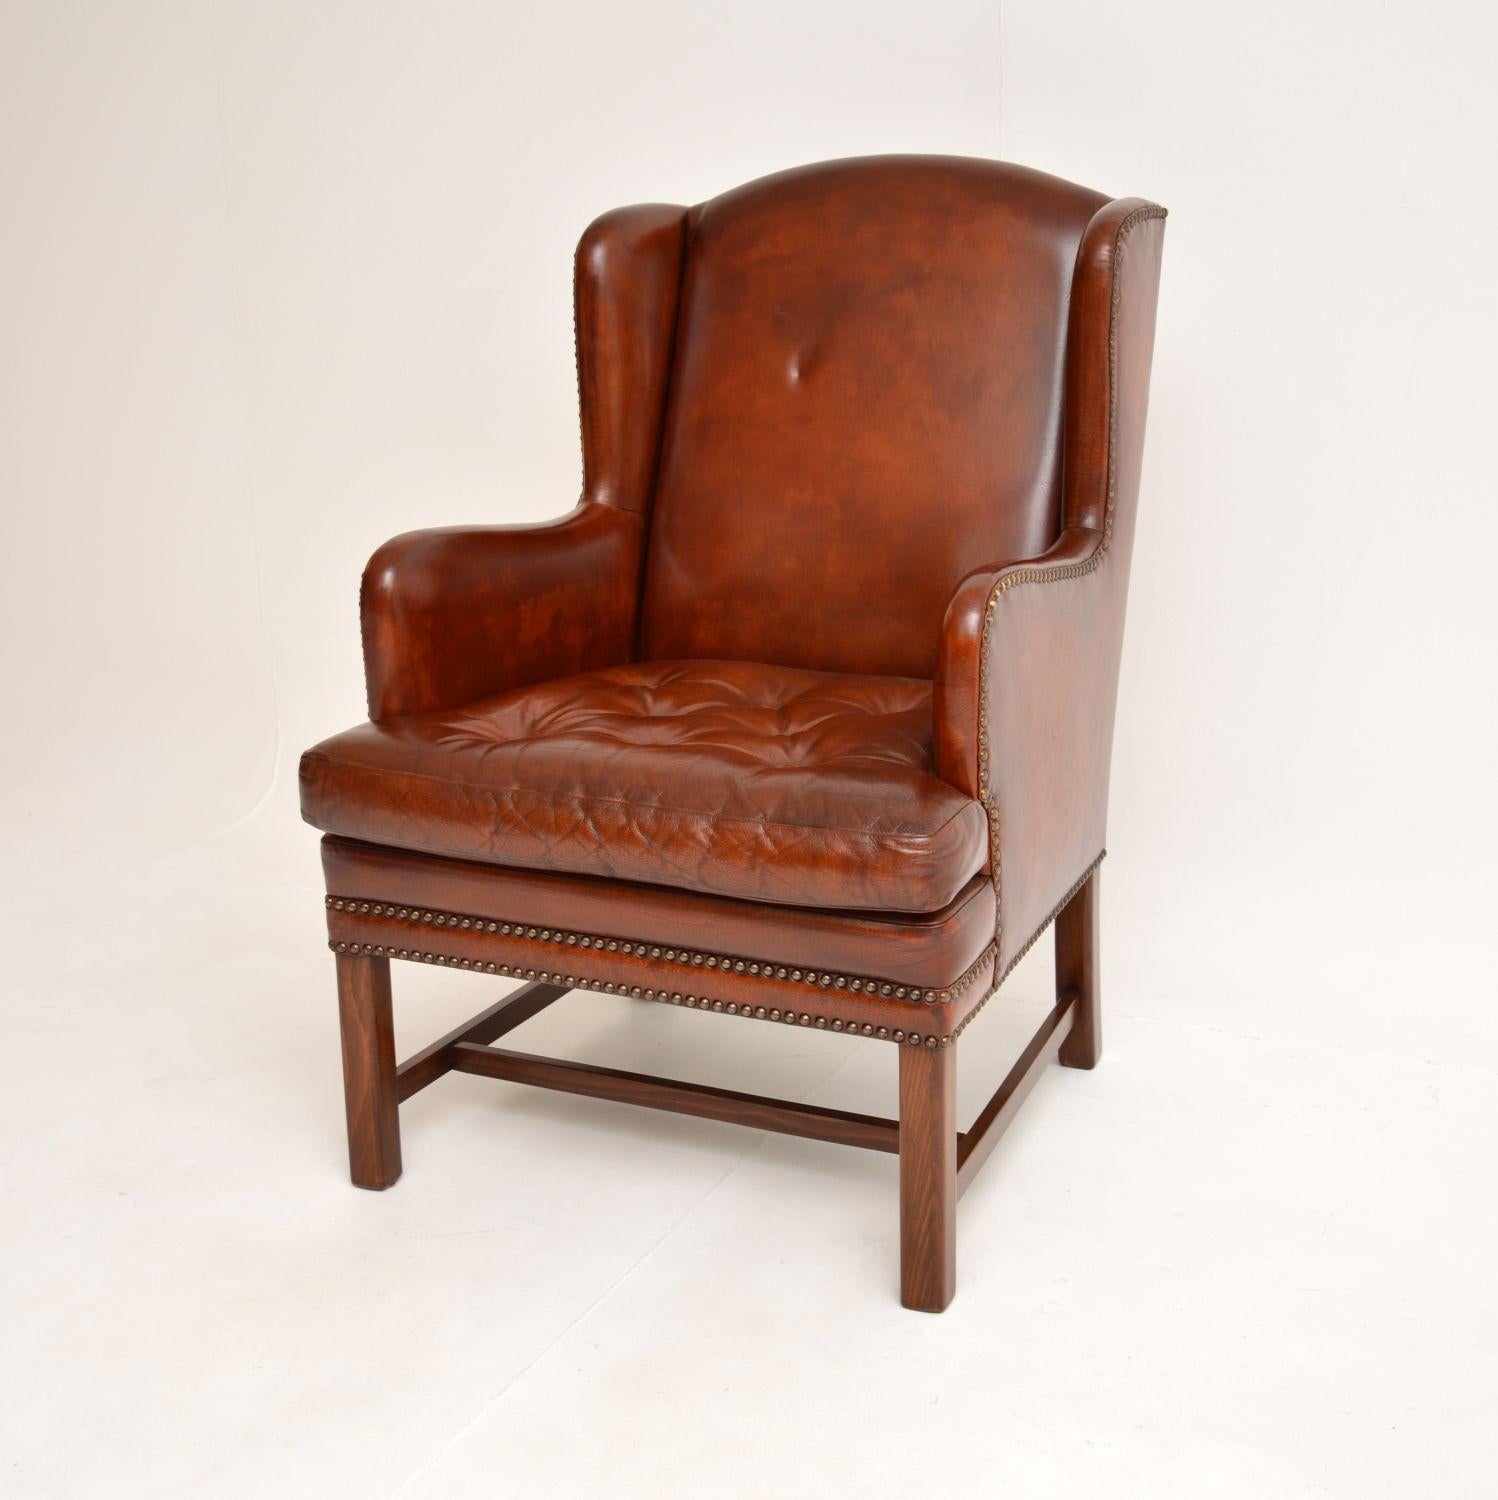 A very stylish and comfortable vintage Swedish leather wing back armchair. This was recently imported from Sweden, and it dates from around the 1930’s.

The quality is fantastic, this has fairly small proportions for a wing chair, it still has